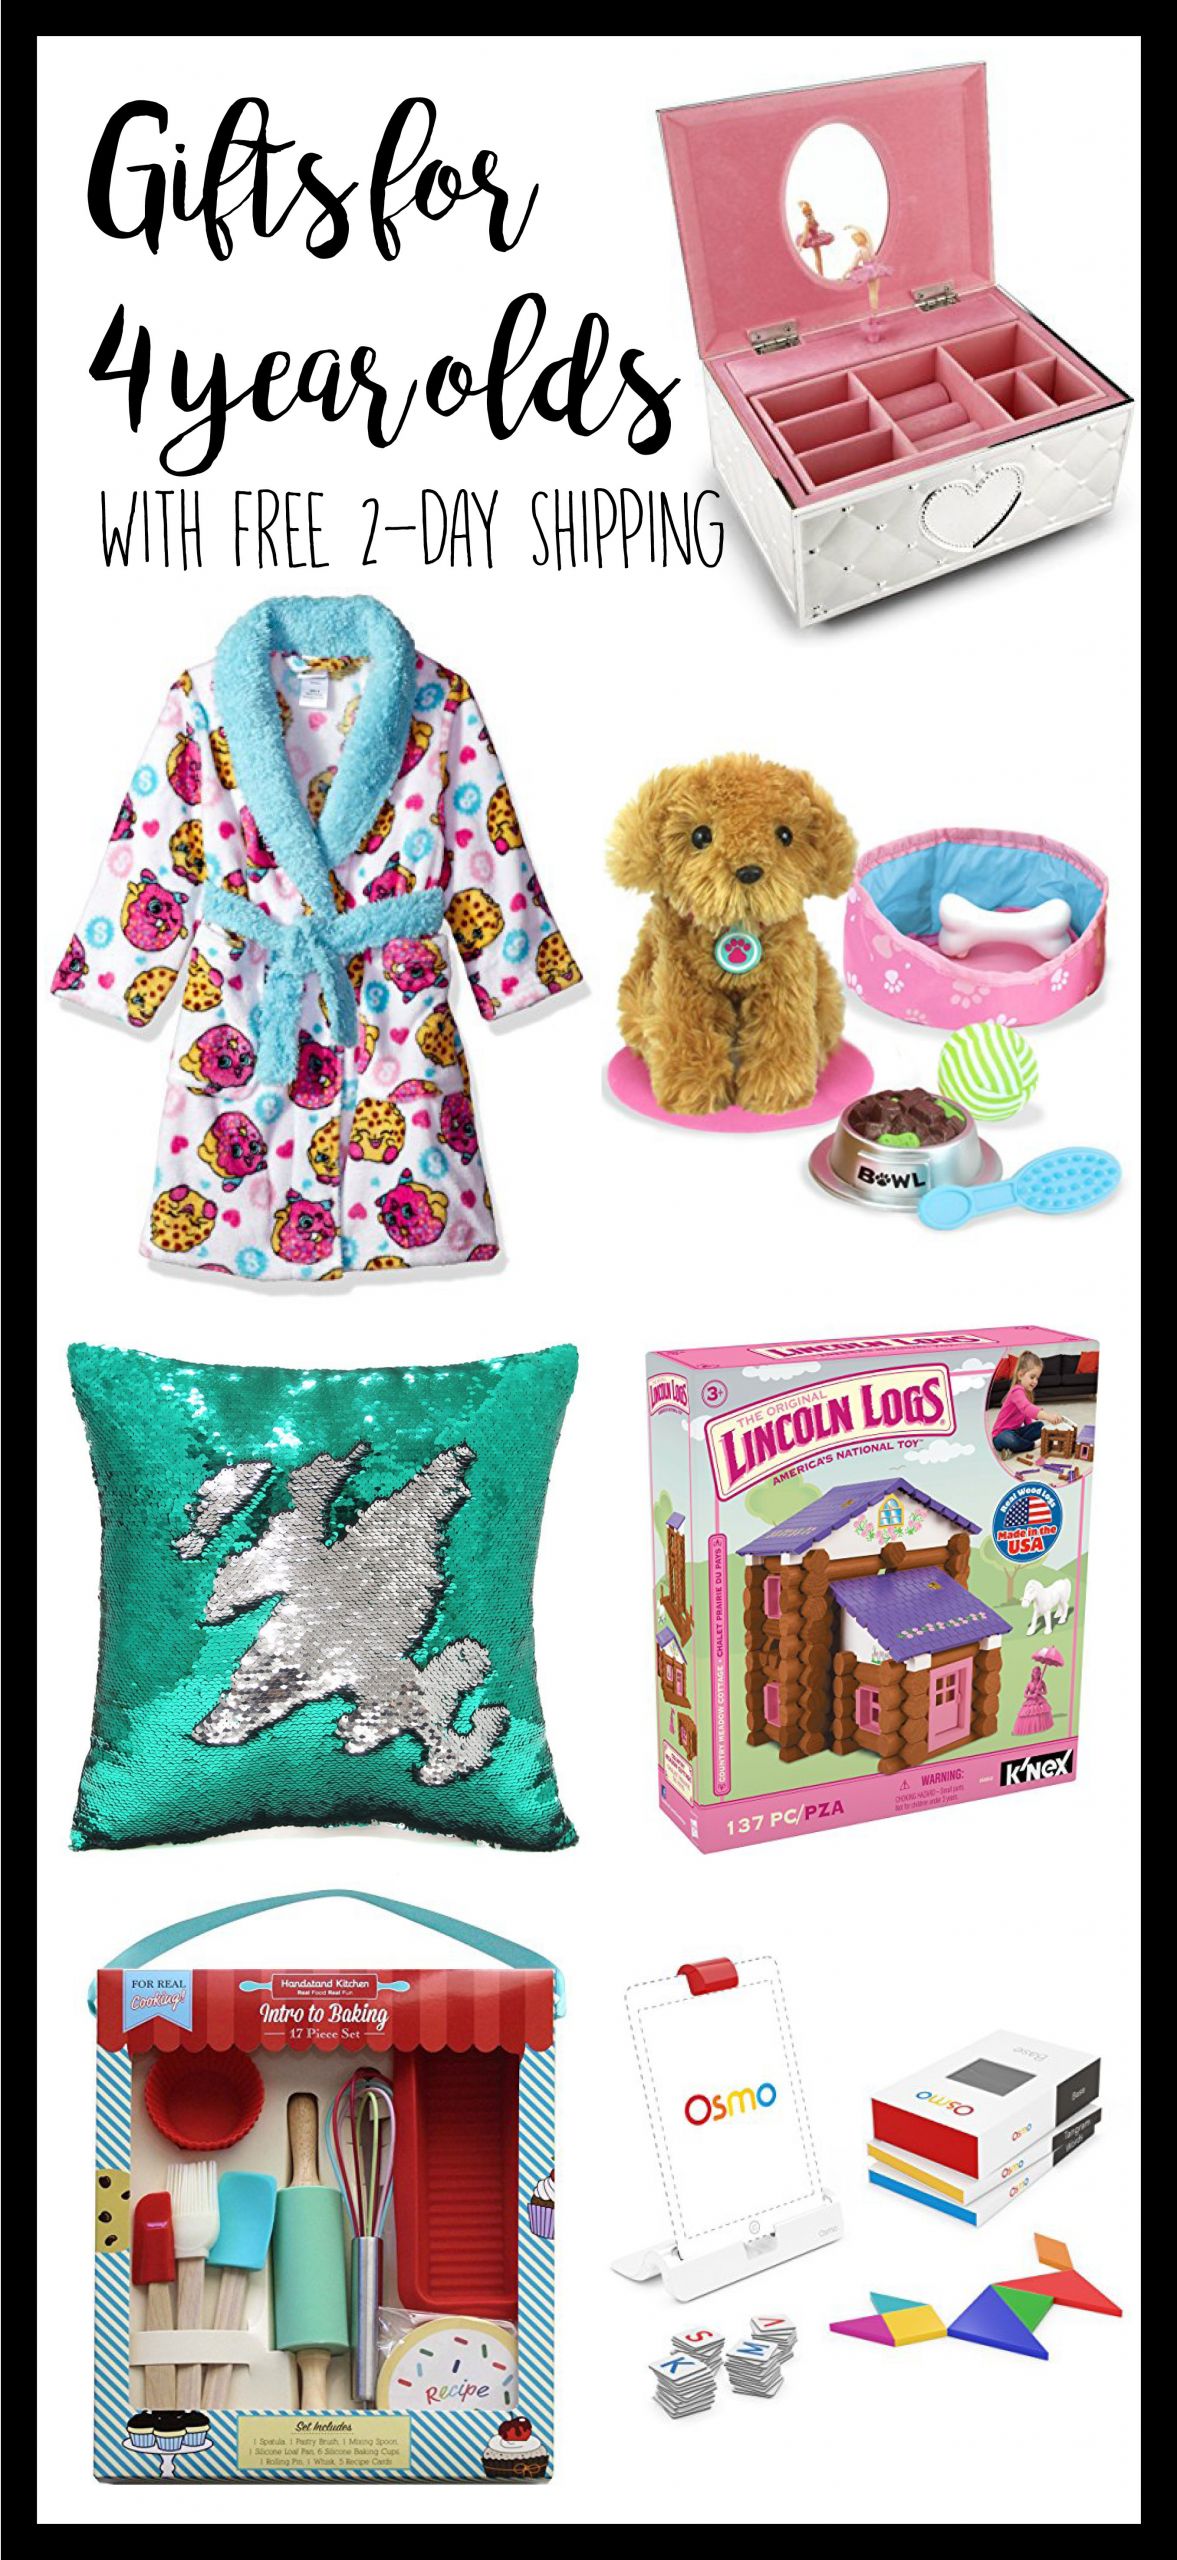 4 Year Old Birthday Gift Ideas
 4 Year Old Gift Ideas Gift ideas for 4 year old Girls